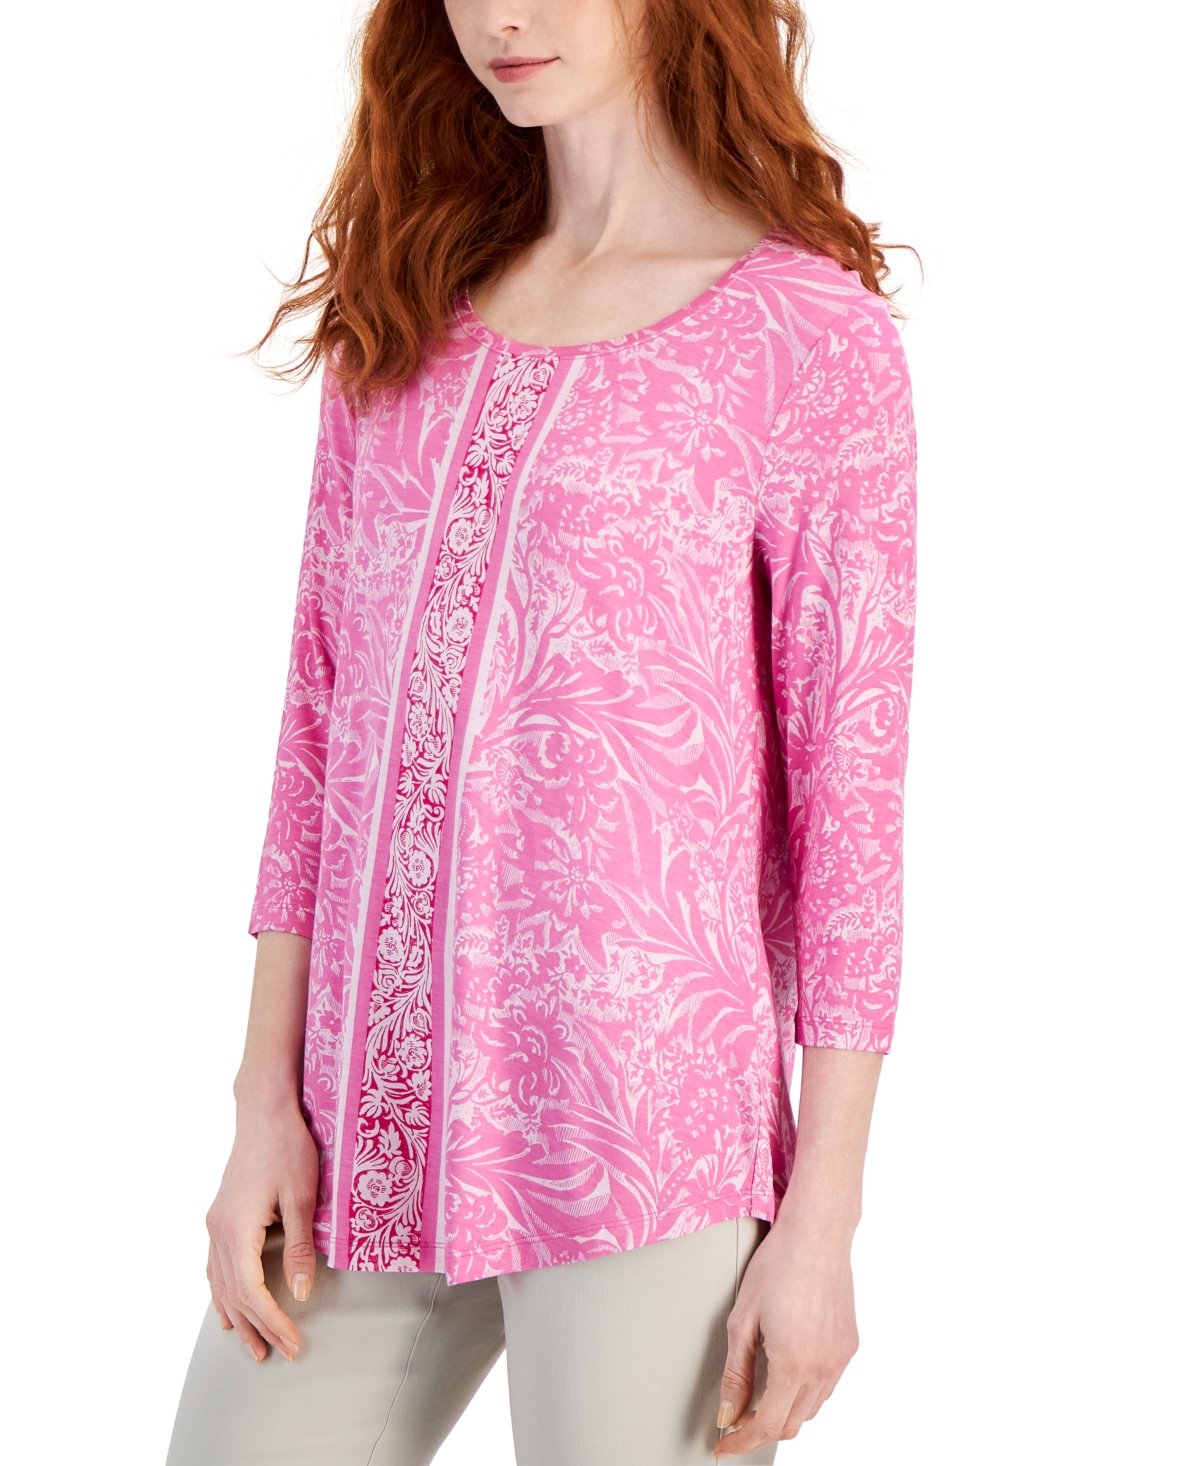 Women's Printed 3/4-Sleeve Relaxed Knit Top, Created for Macy's - Bright Pink Combo